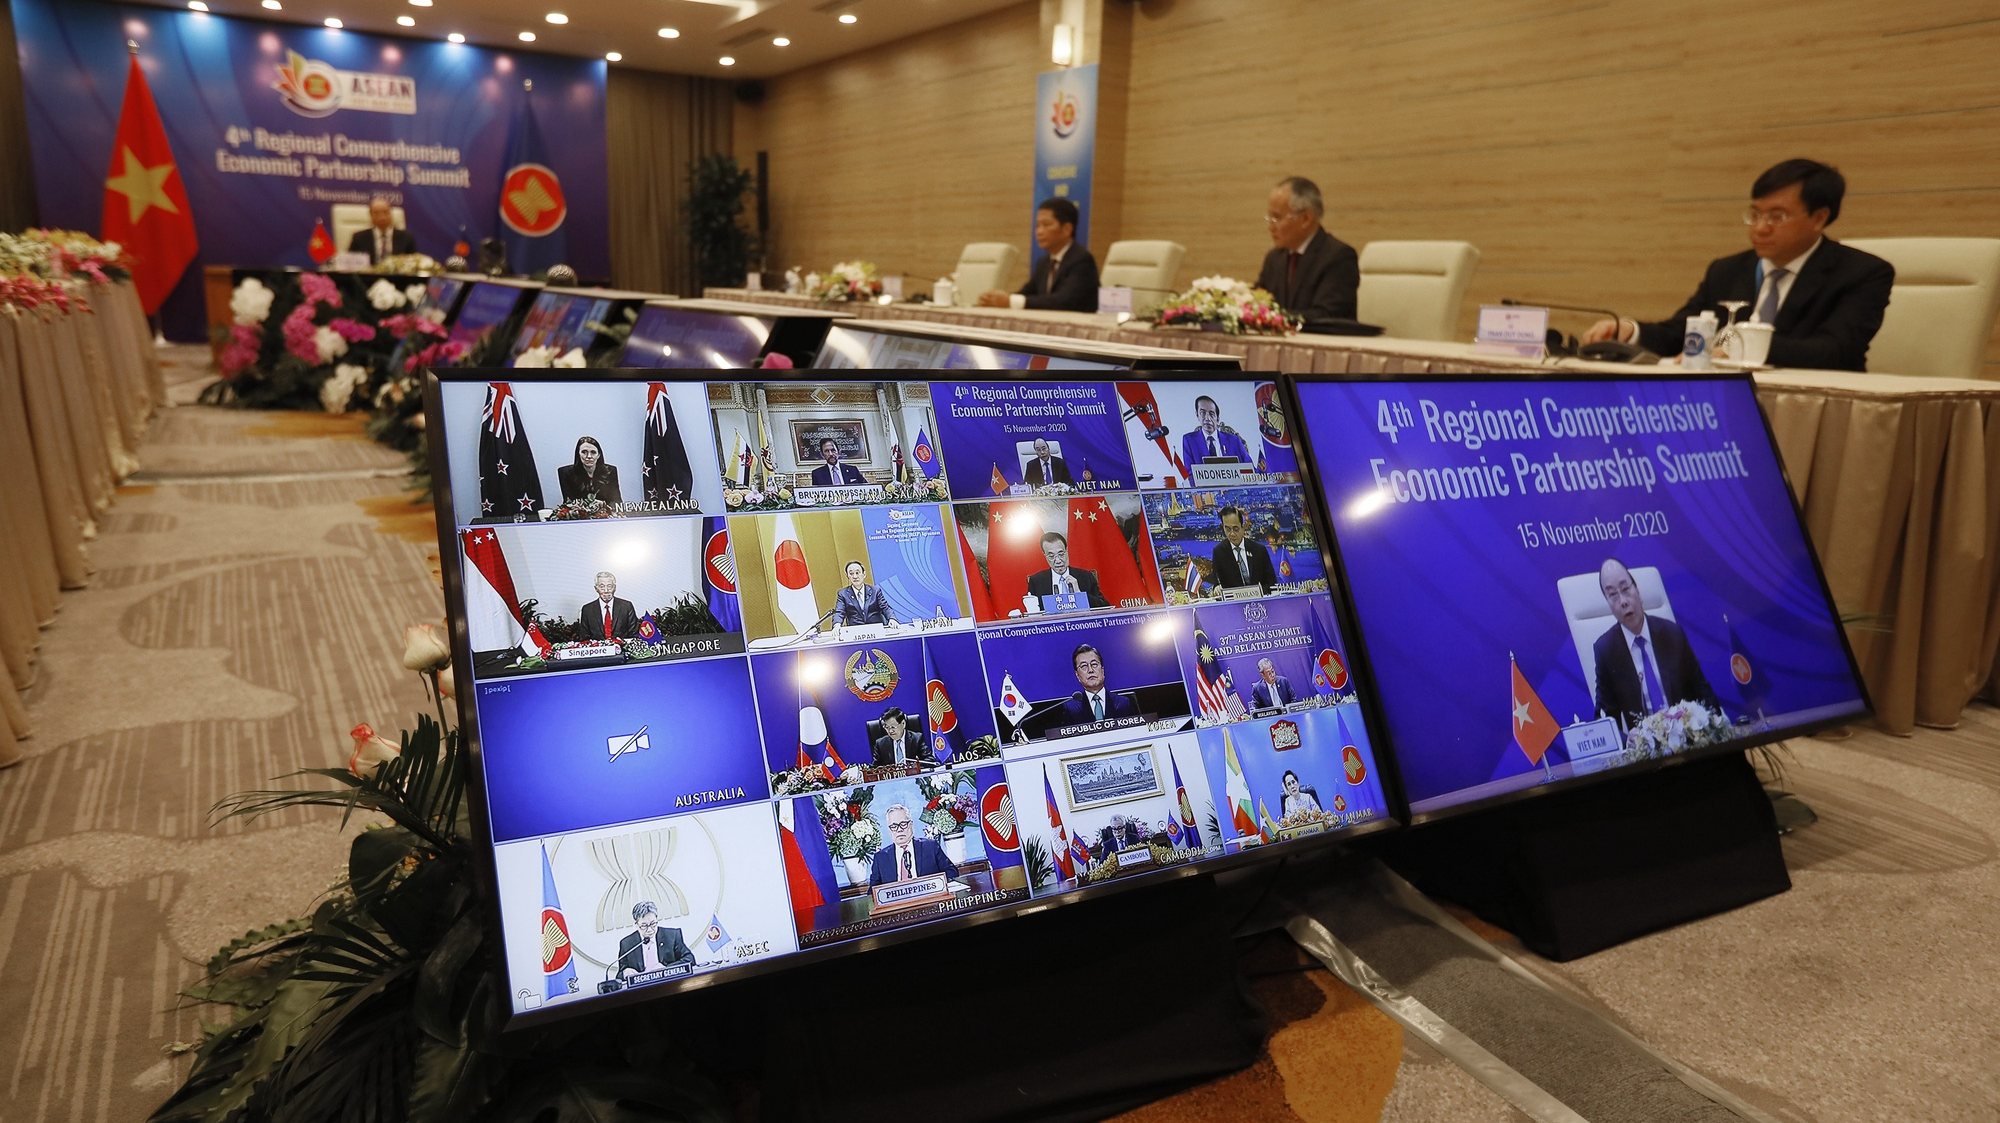 epa08821092 General view of the virtual 4th Regional Comprehensive Economic Partnership Summit in Hanoi, Vietnam, 15 November 2020. The virtual 37th ASEAN Summit and related summits take place from 12 to 15 November 2020 at the International Convention Center (ICC) in Hanoi.  EPA/LUONG THAI LINH